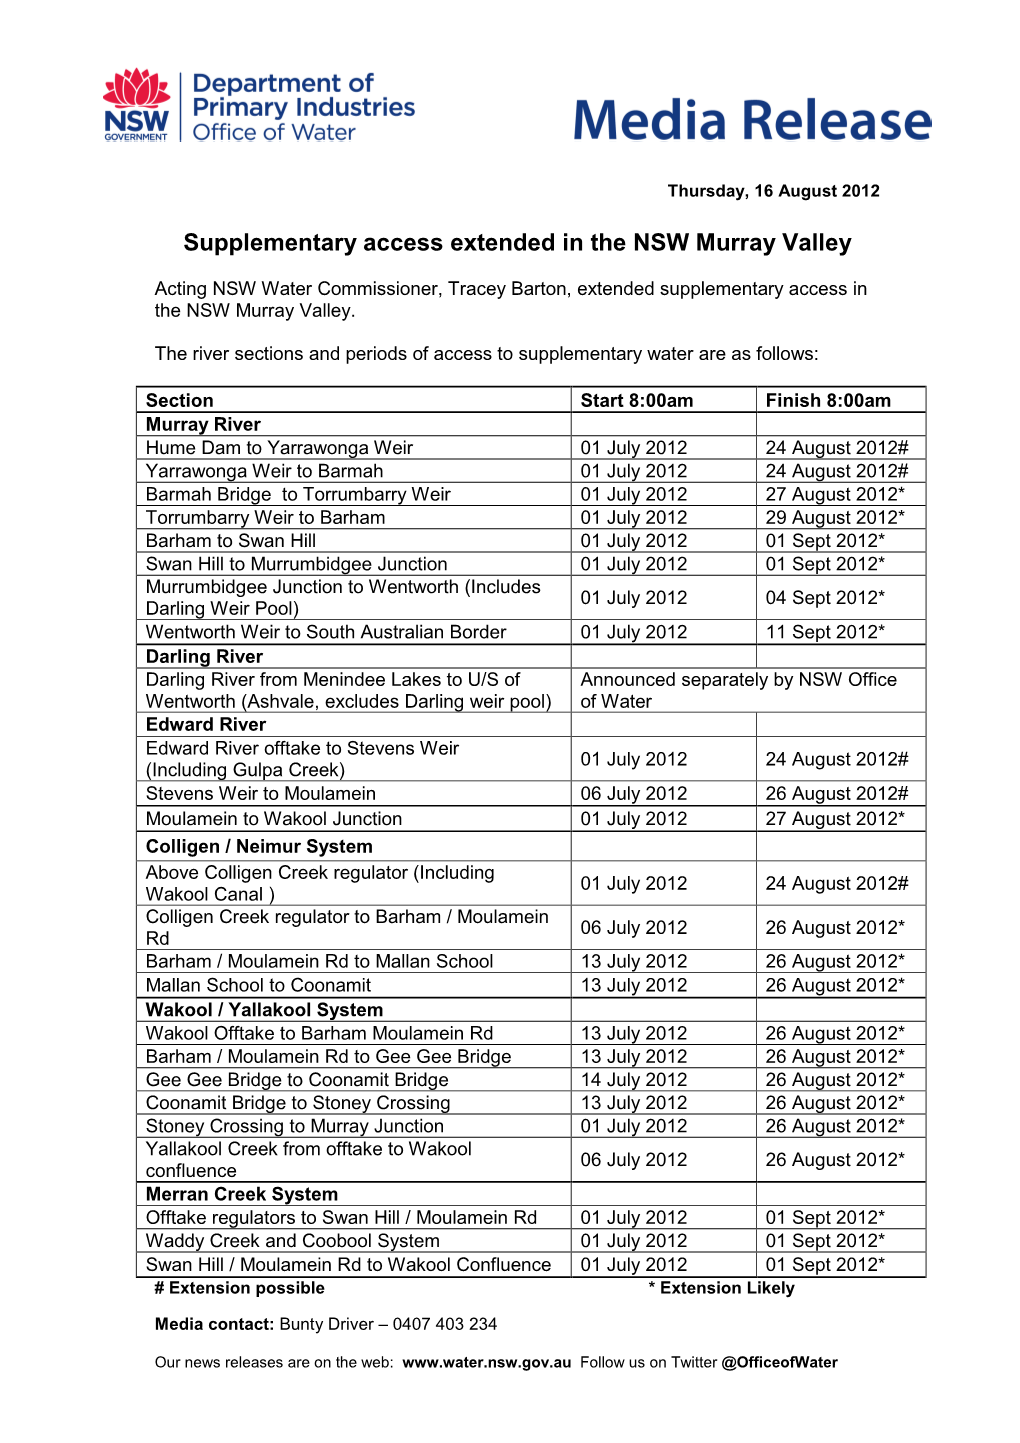 Media Release 120816 Supplementary Access Murray